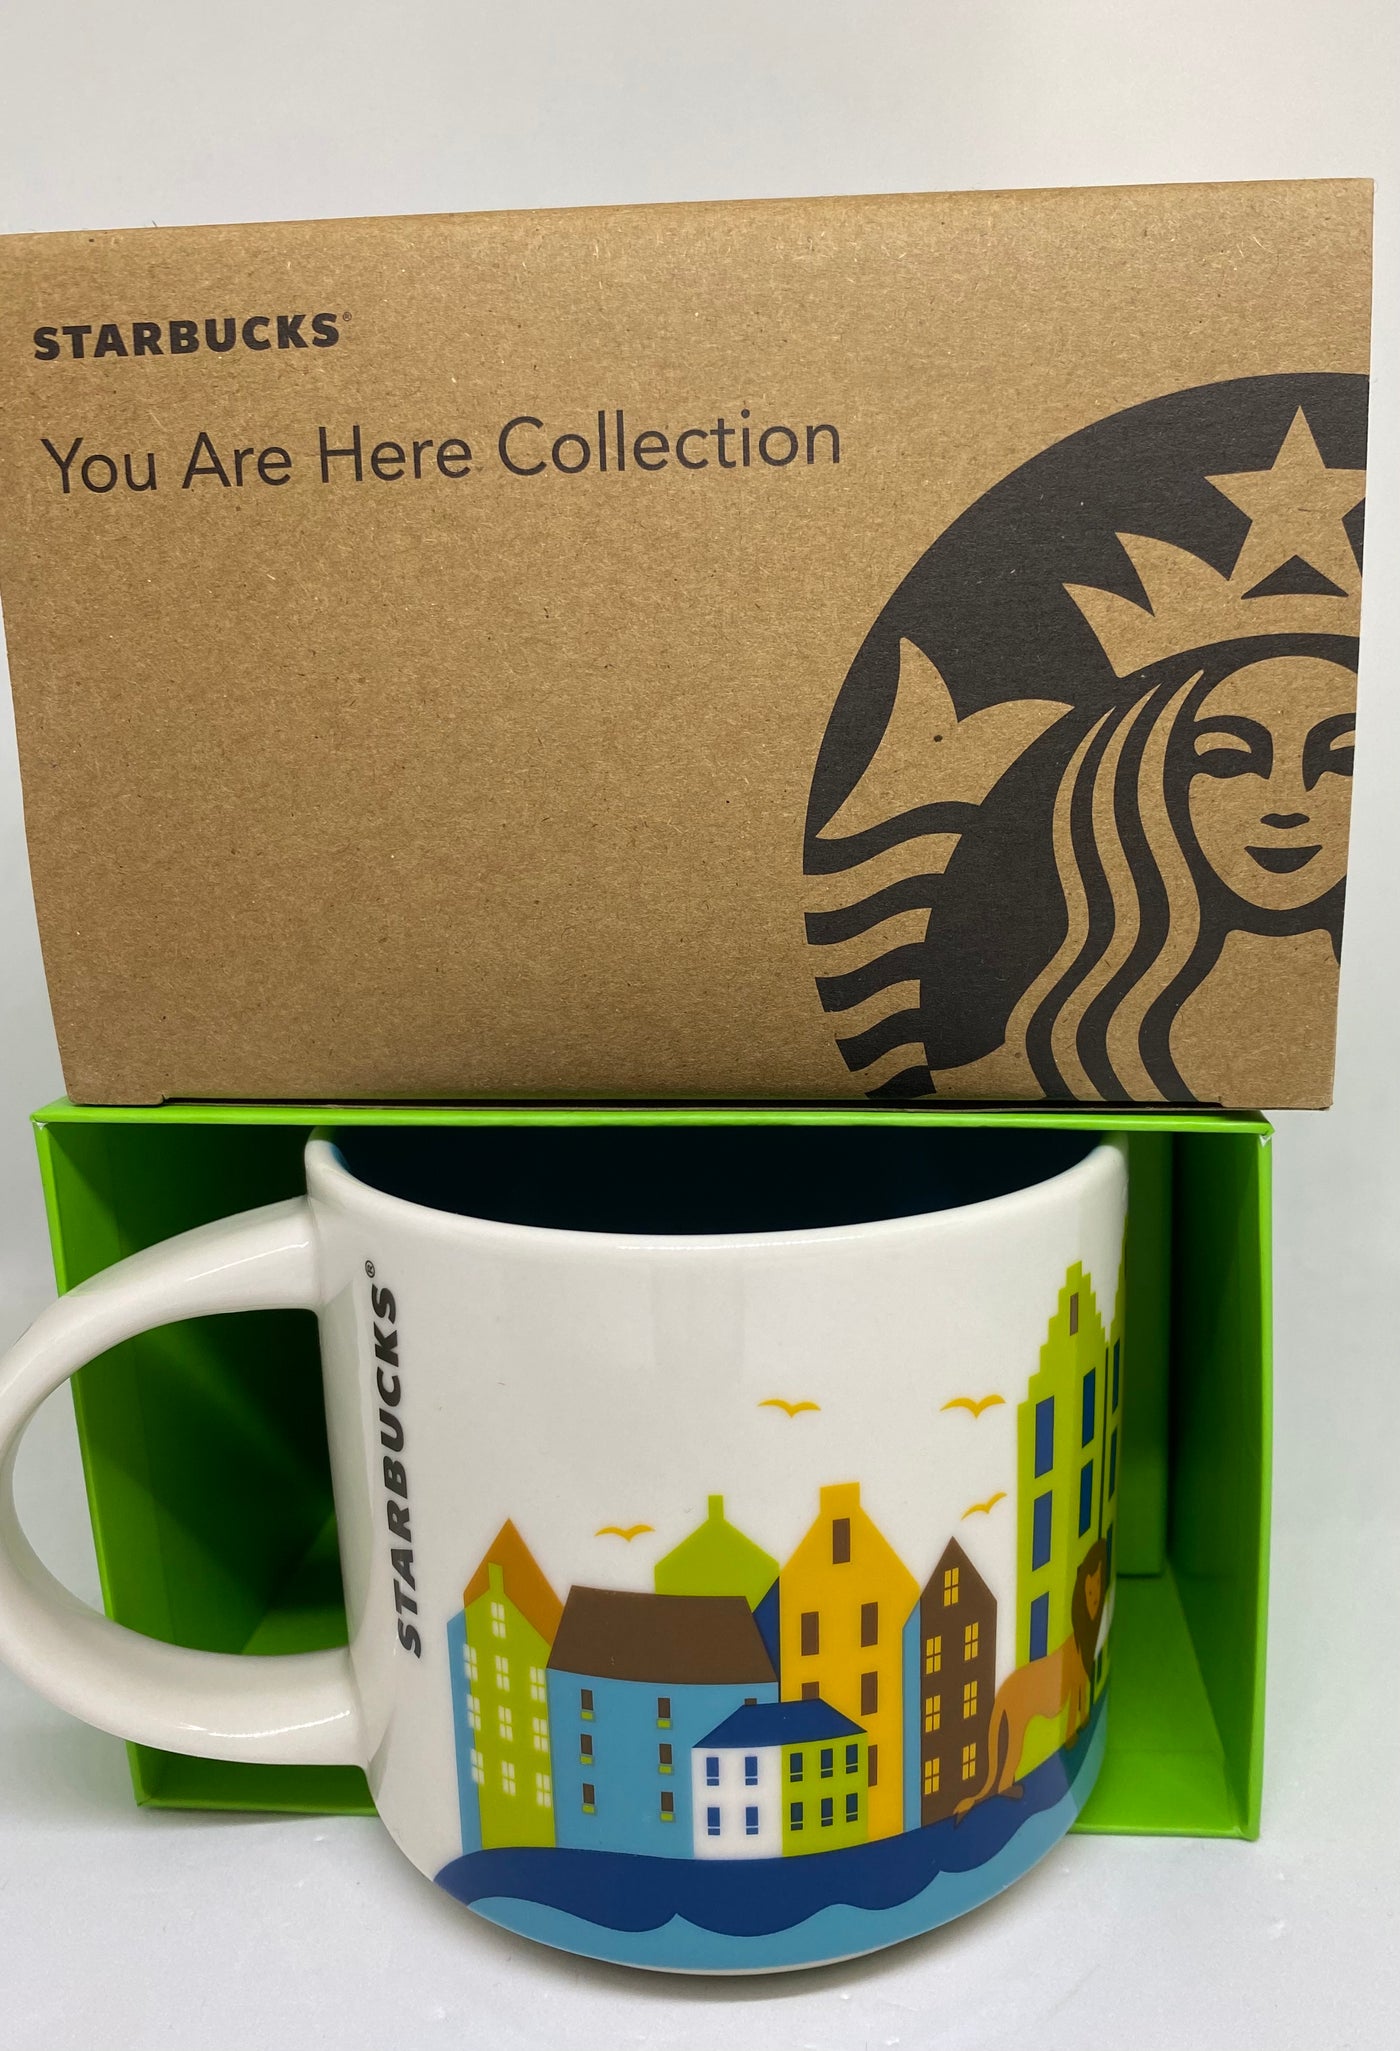 Starbucks You Are Here Collection Gdansk Poland Ceramic Coffee Mug New Box